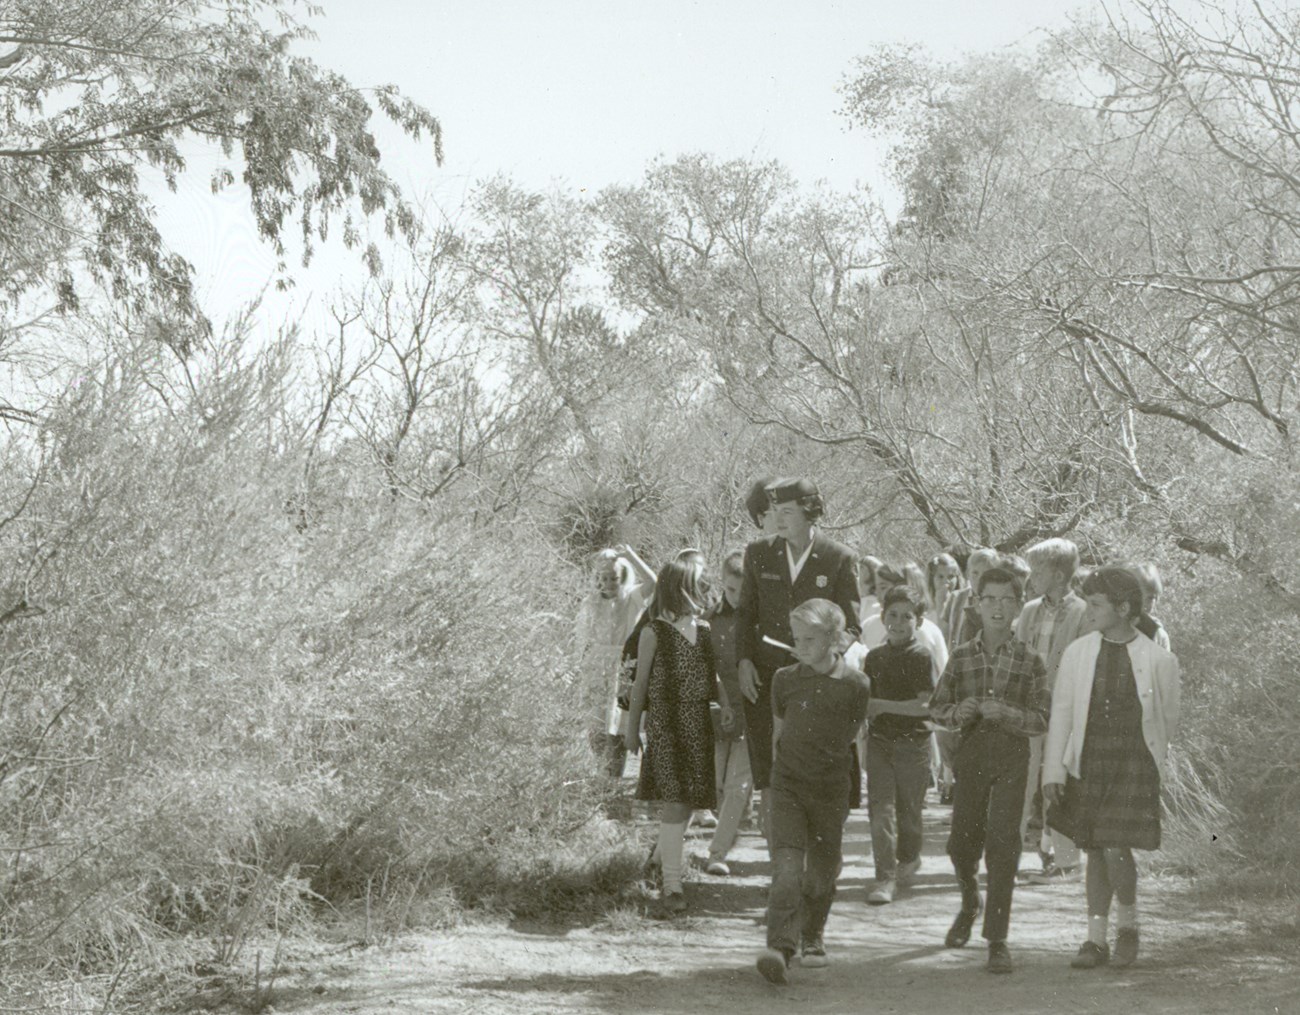 photo from the 1960s showing a group of children walking in the desert with a woman ranger